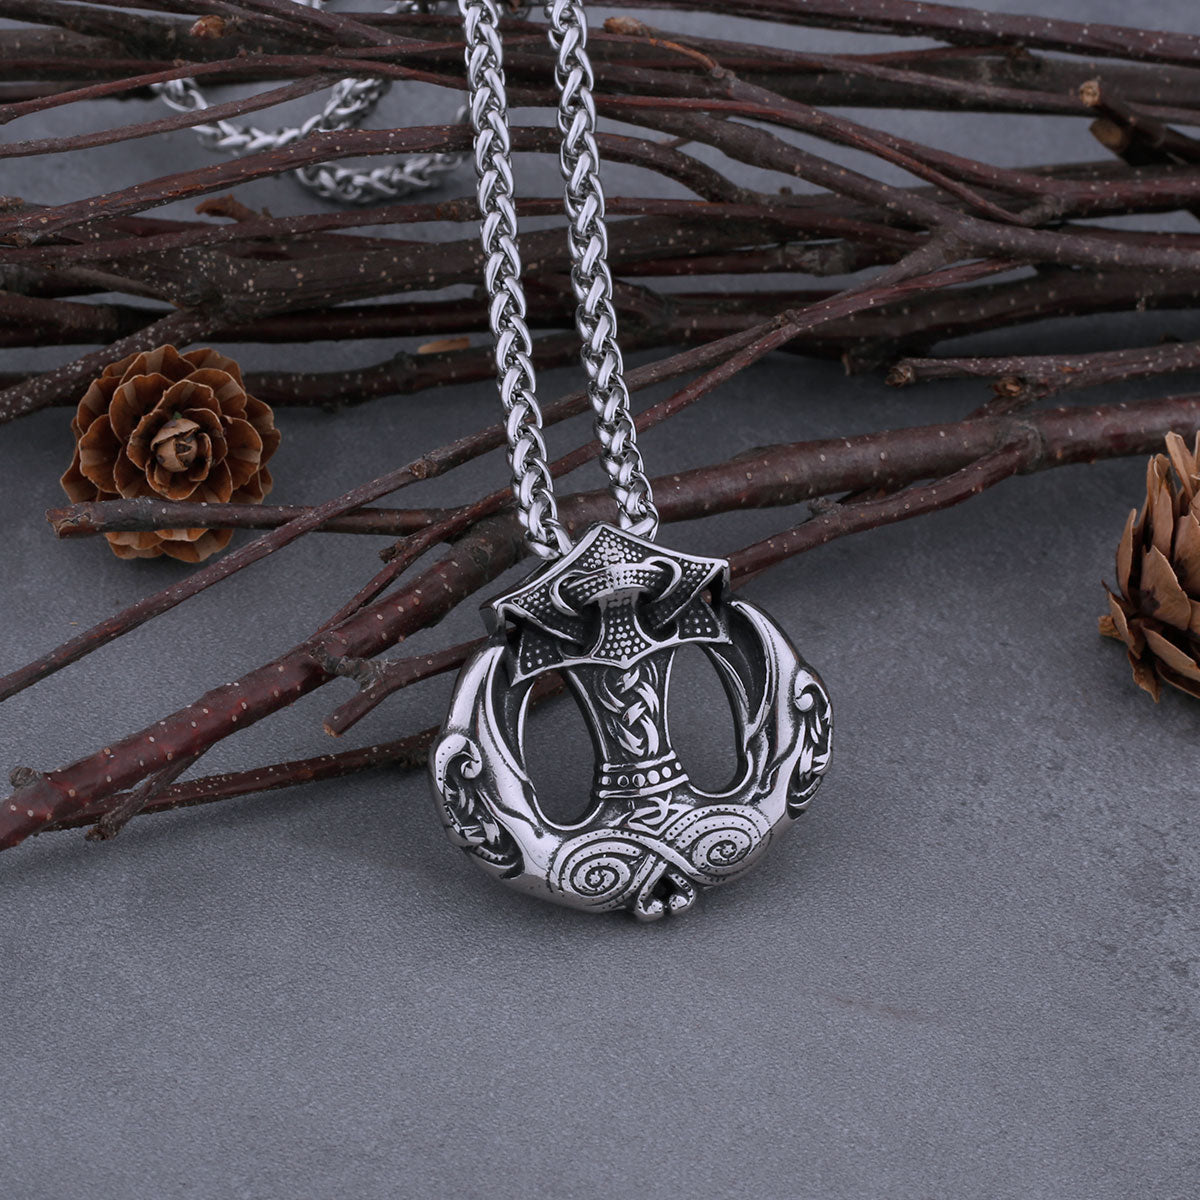 Thor's Hammer Mjolnir Necklace Featuring Nordic Anchor Design